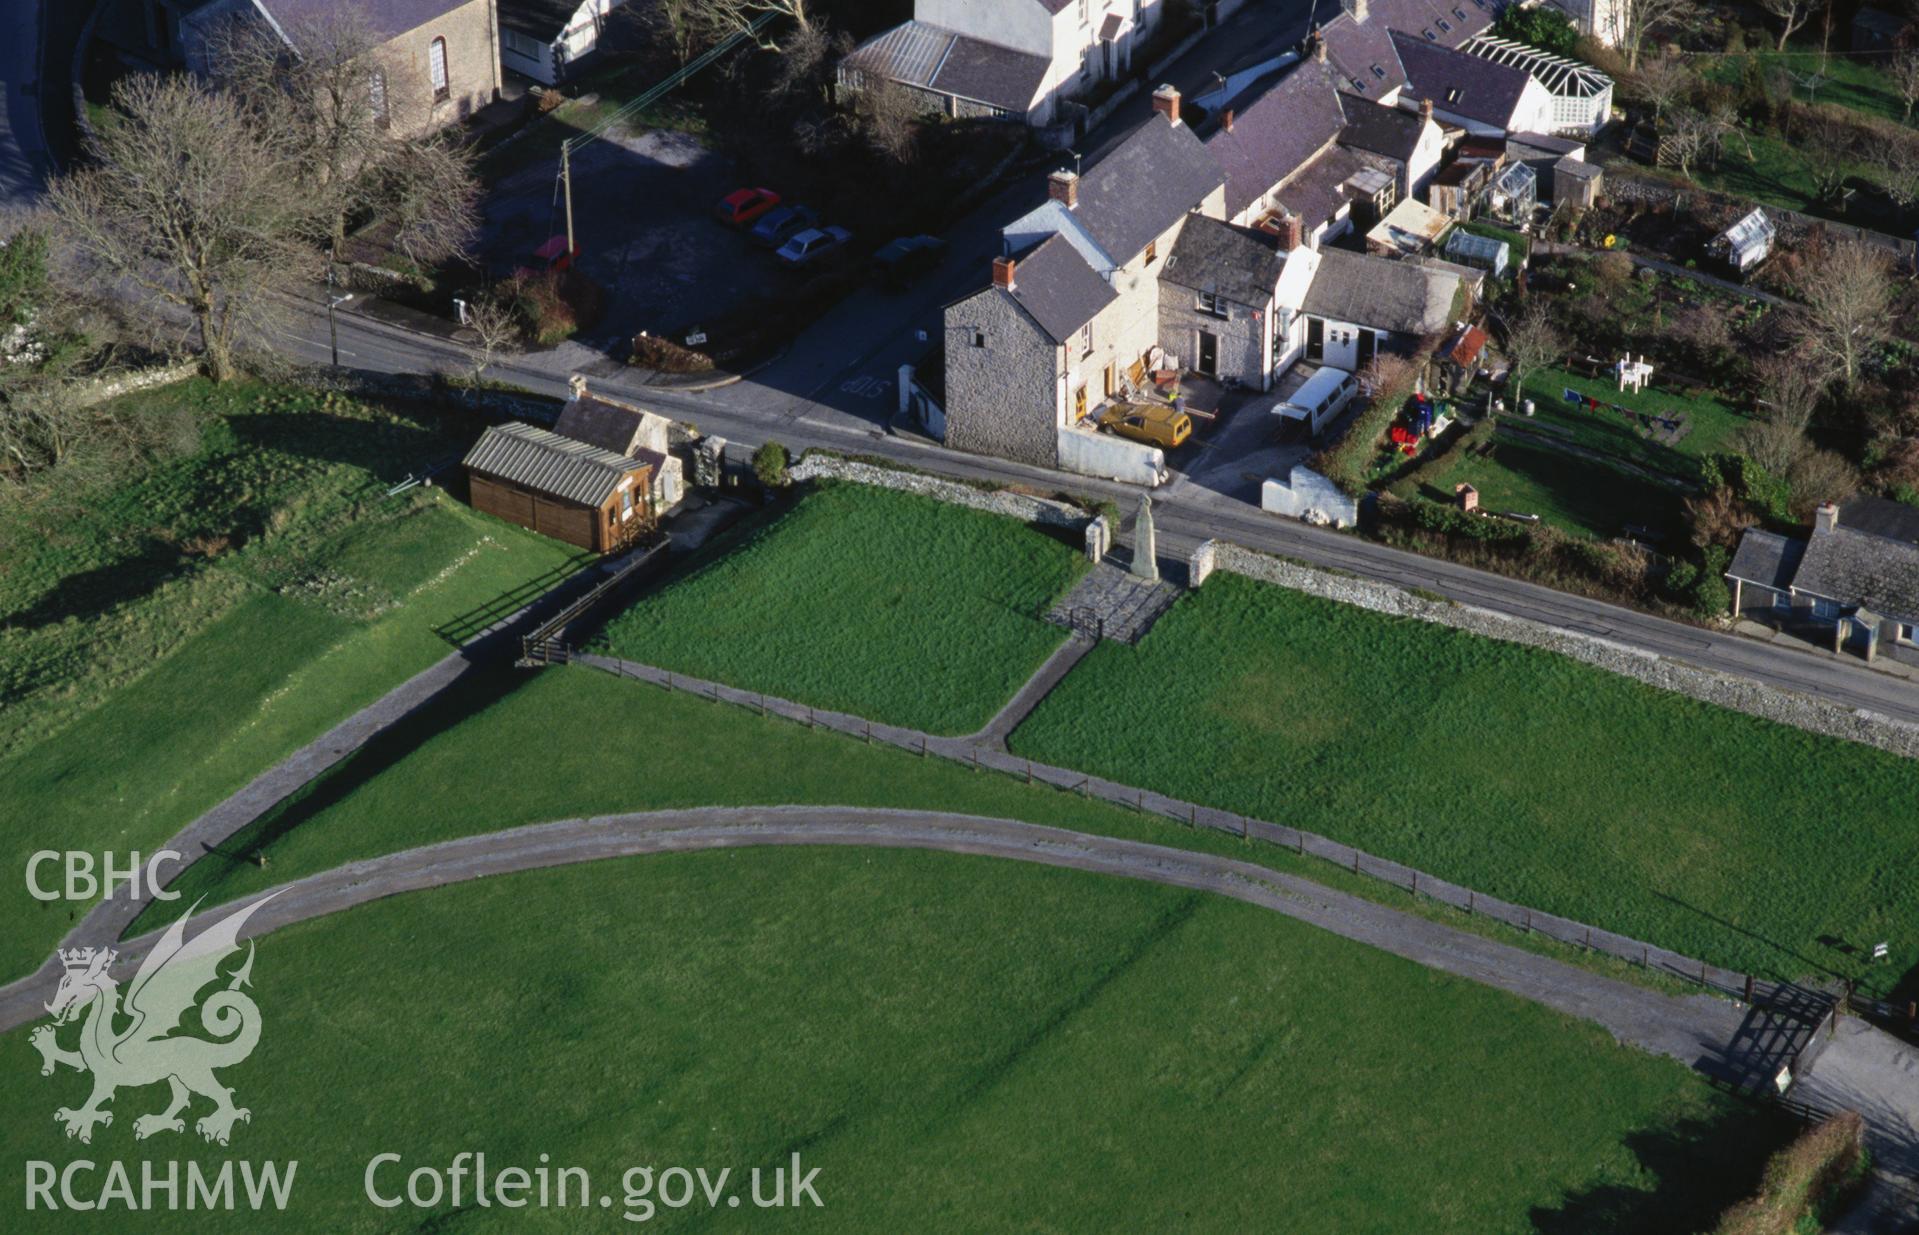 RCAHMW colour slide oblique aerial photograph of Carew High Cross, Carew, taken by C.R. Musson, 28/01/94